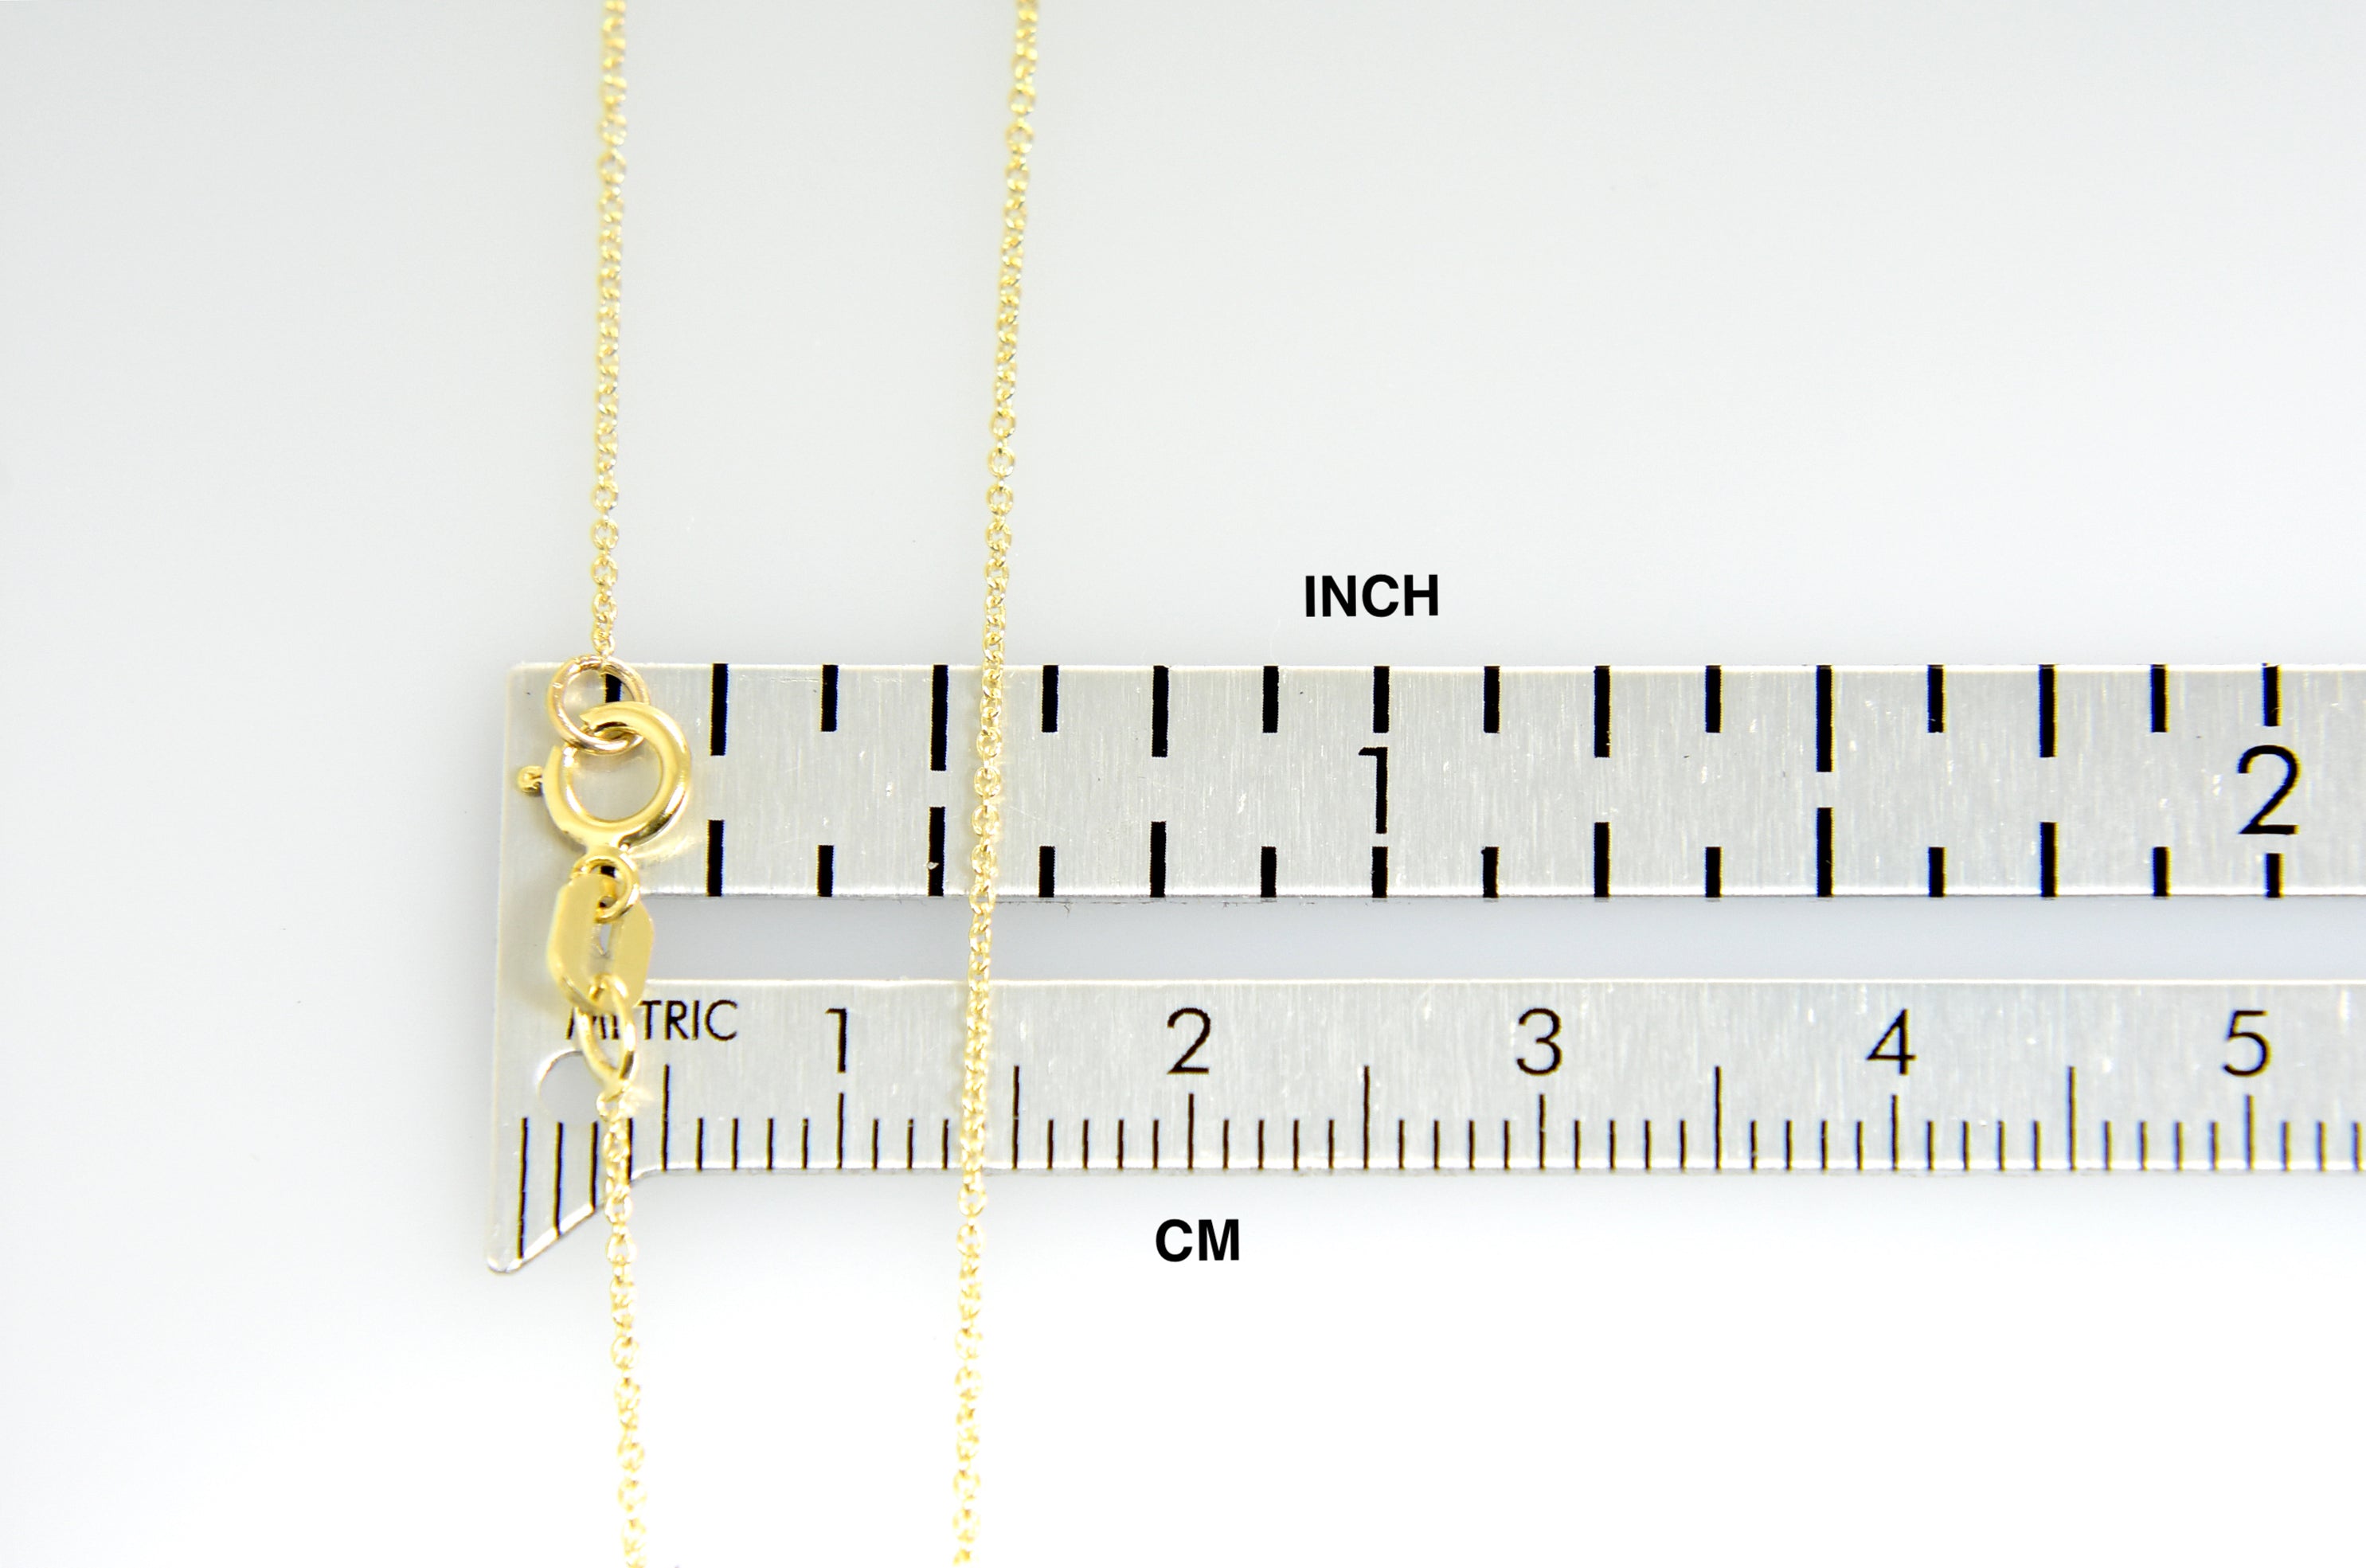 14k Yellow Gold 0.75mm Polished Cable Bracelet Anklet Choker Necklace Pendant Chain